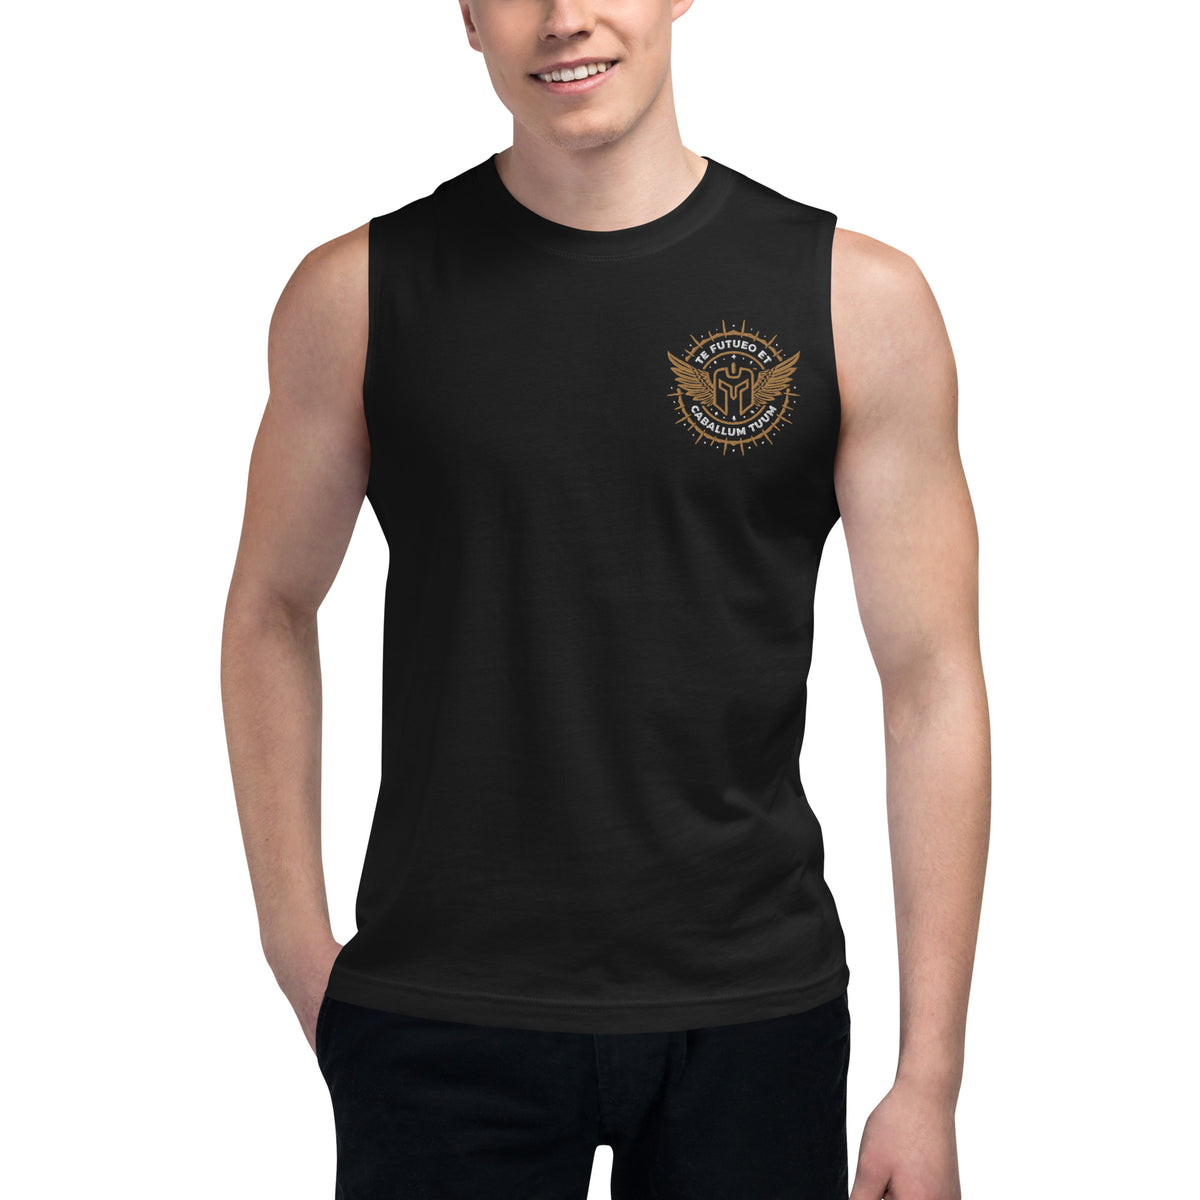 Te Futueo Et Caballum Tuum (Latin - Screw you, and the horse you rode in on) Muscle Shirt